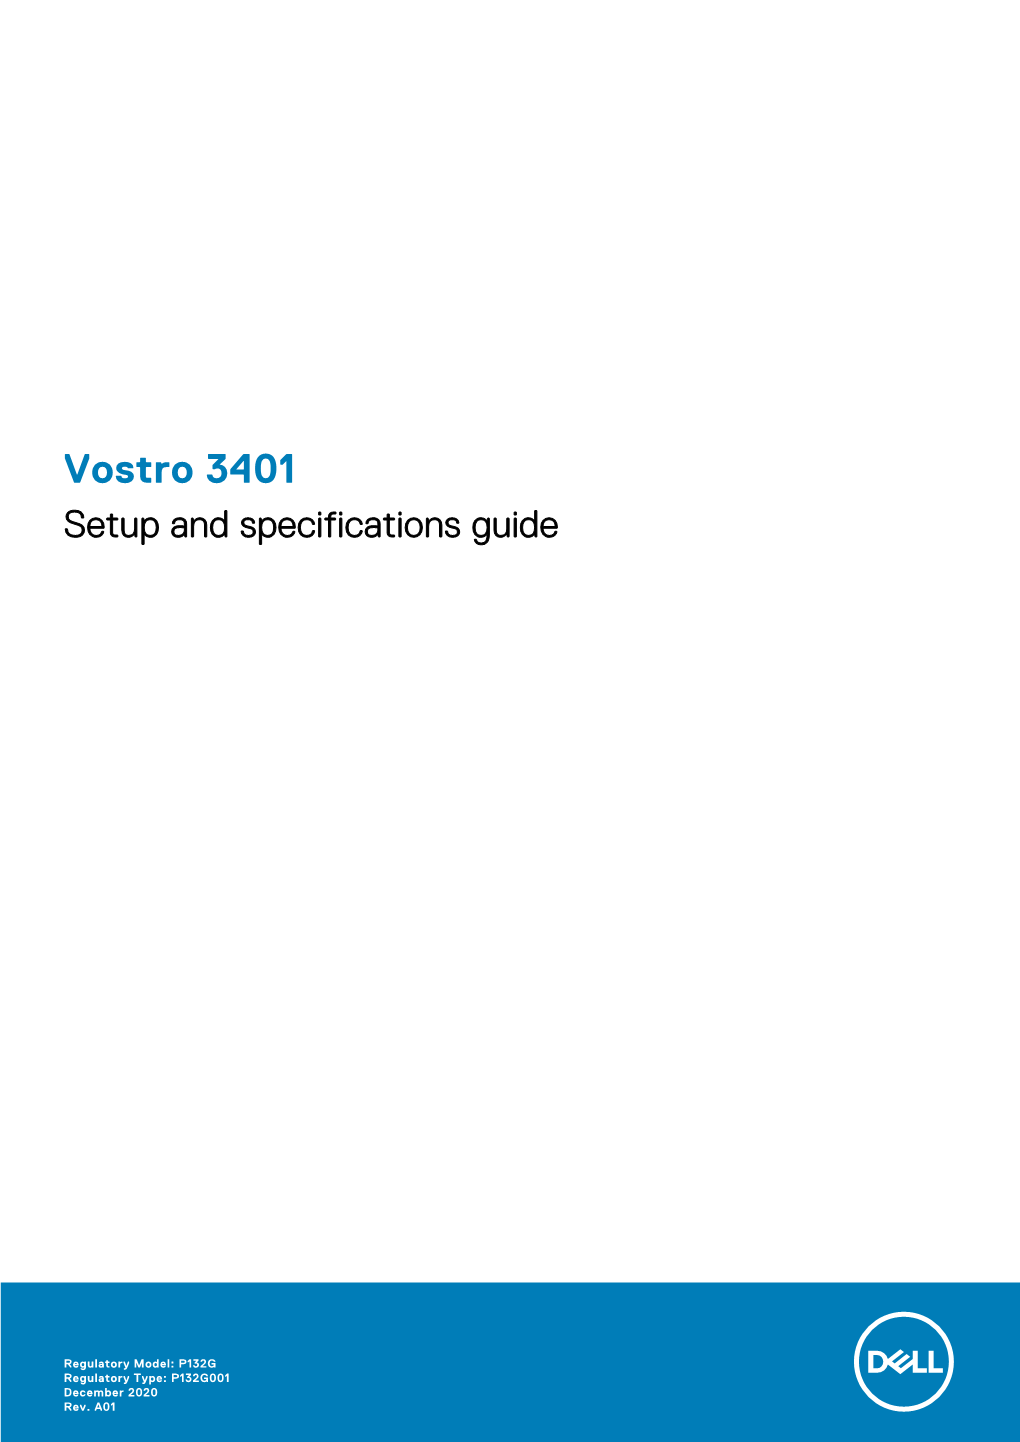 Vostro 3401 Setup and Specifications Guide